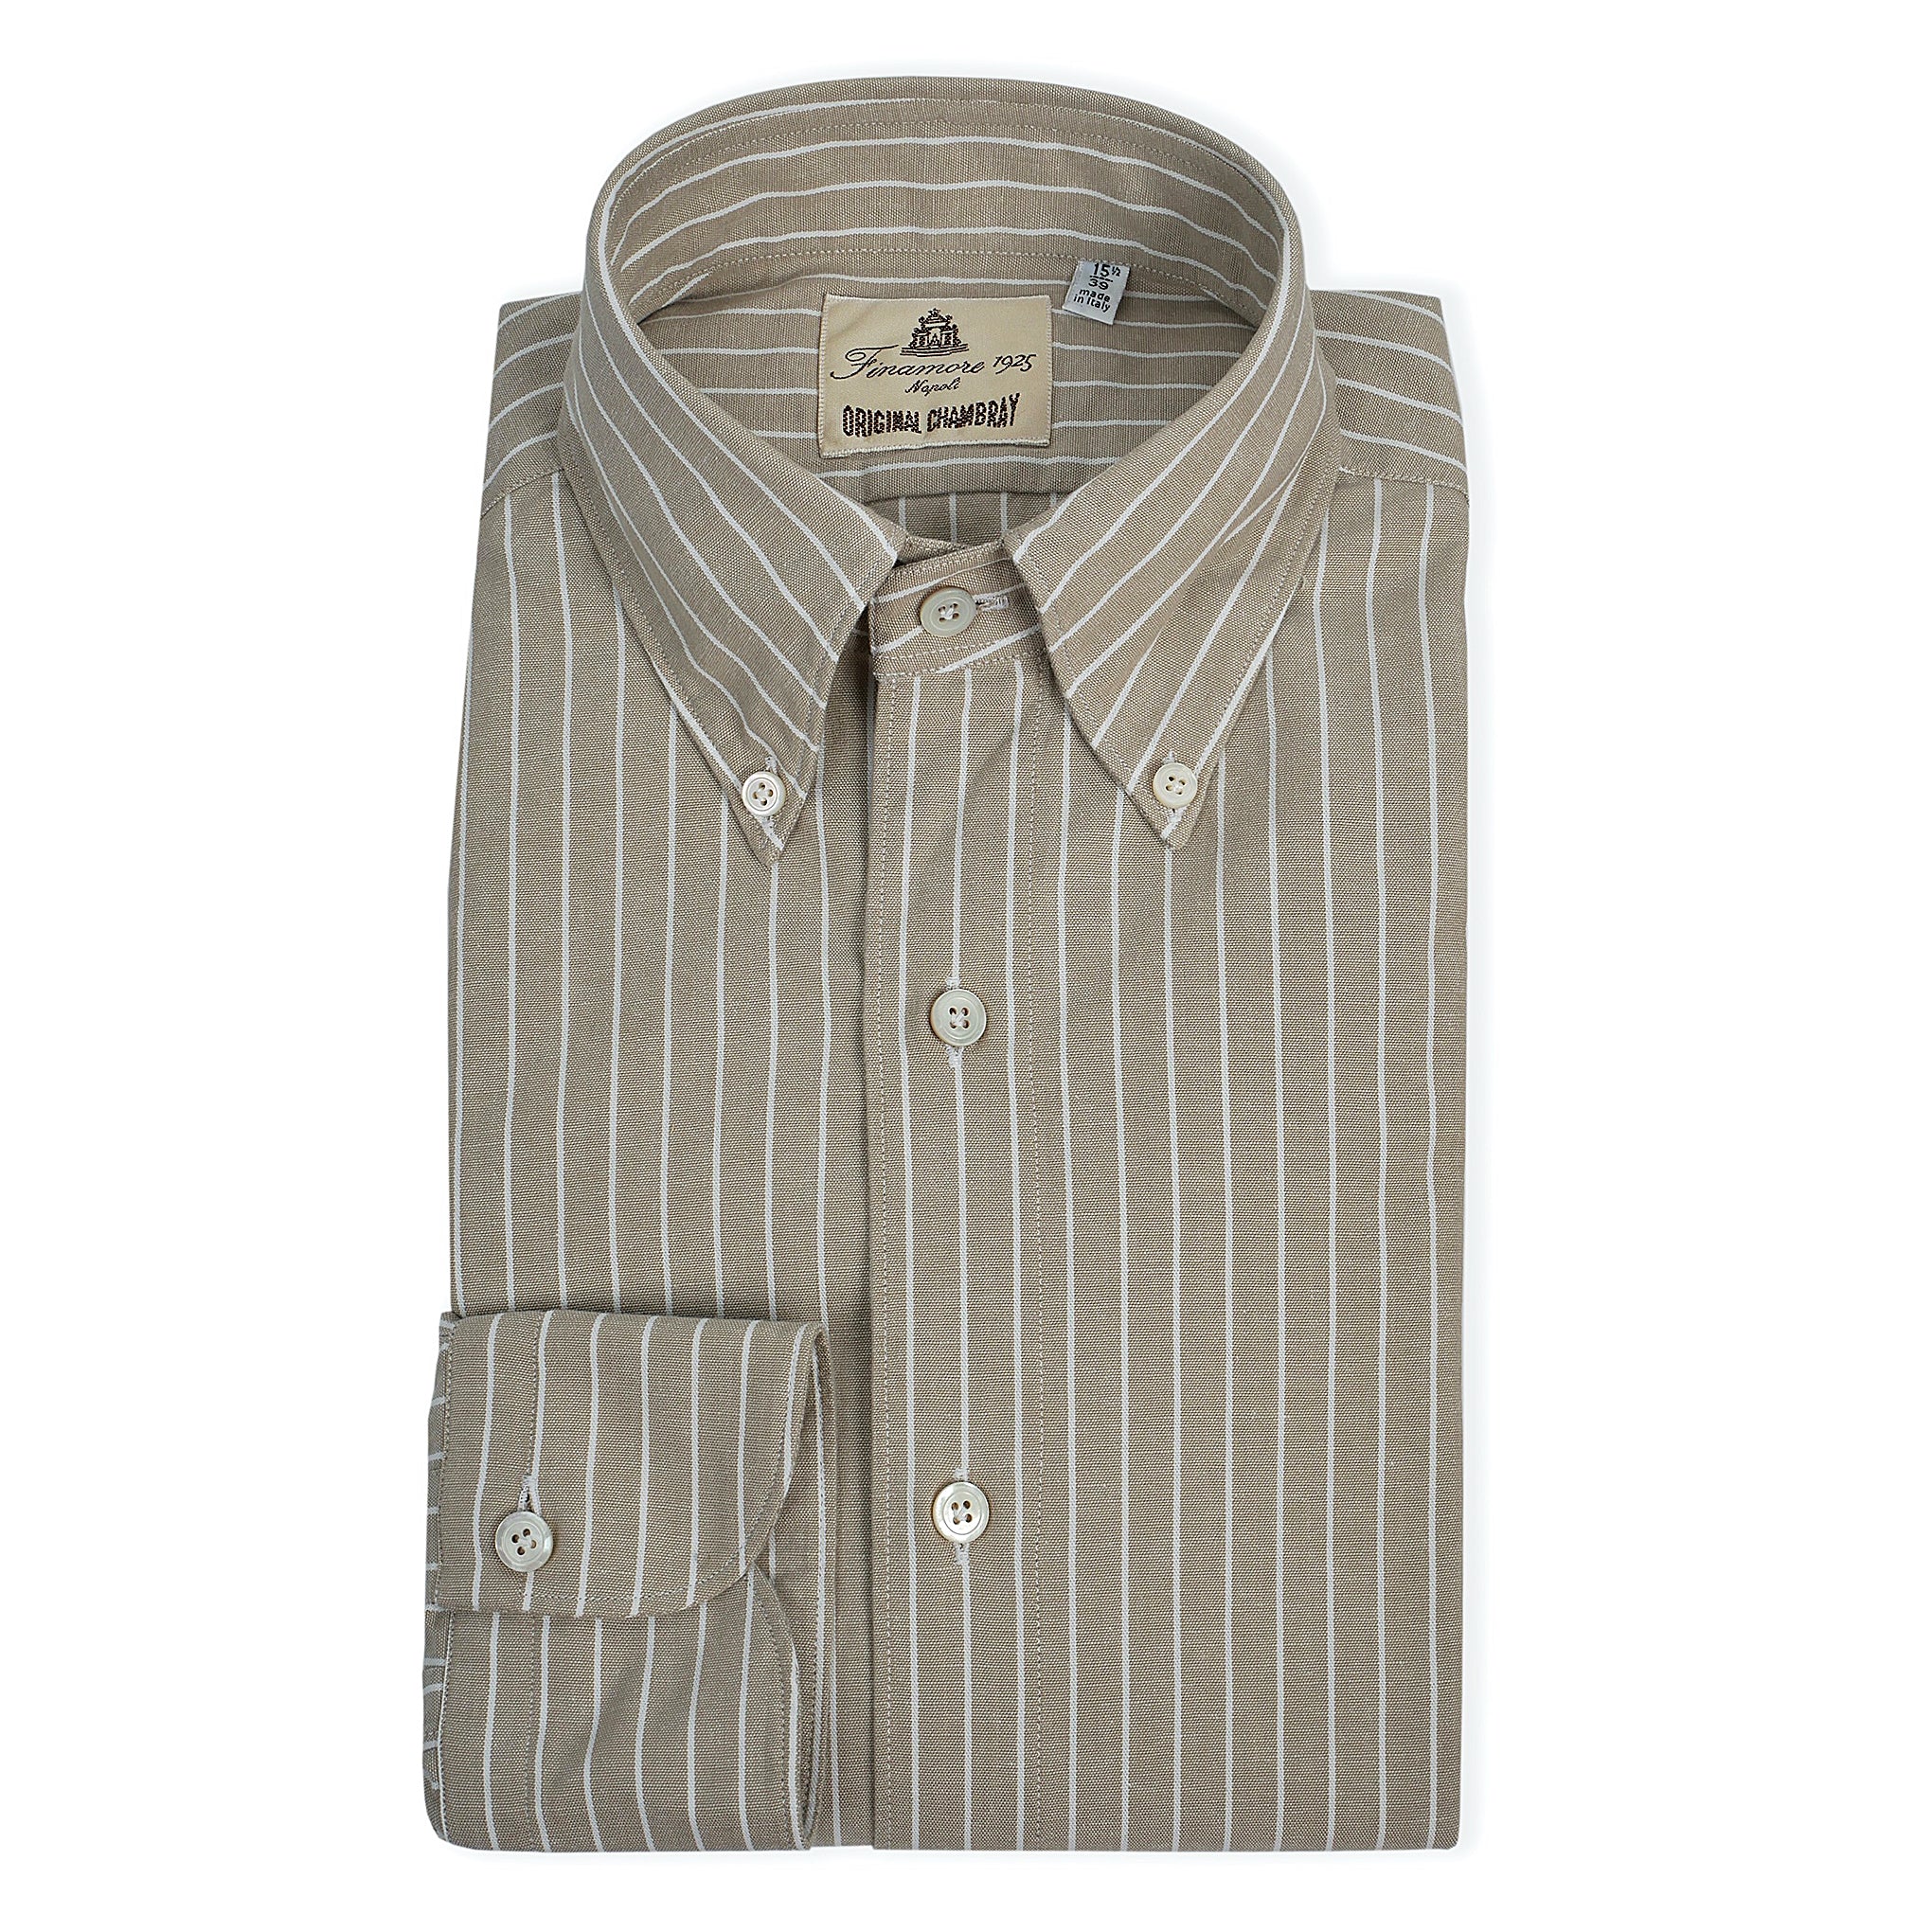 Sports shirt button-down tokyo in beige pinstriped chambray. Finamore 1925